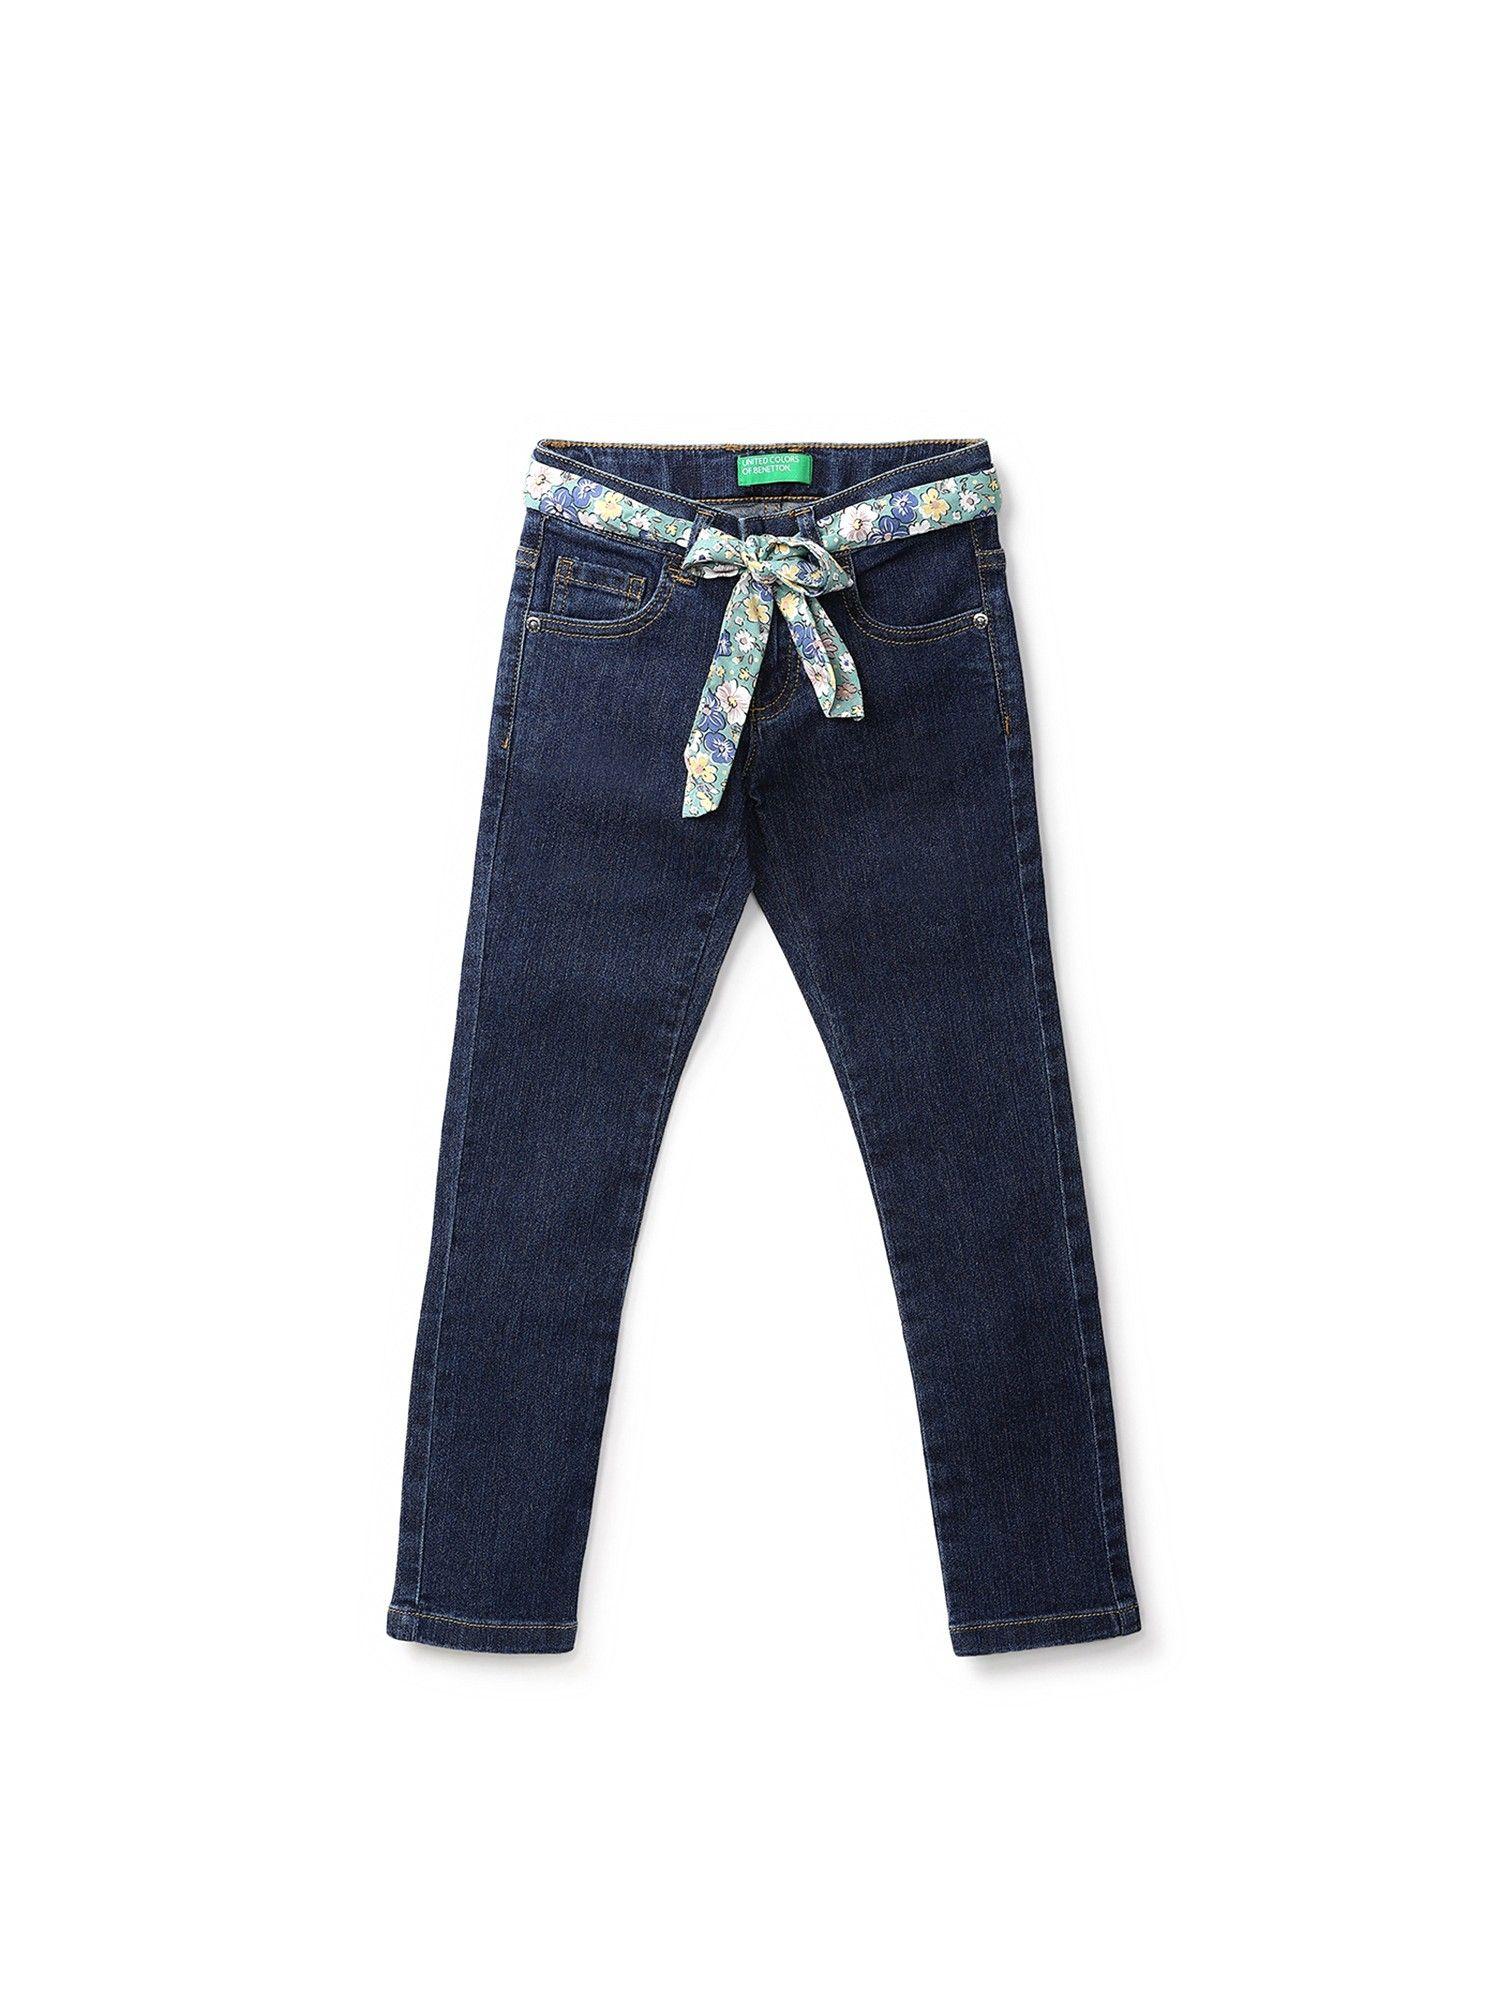 girls navy blue solid jeans